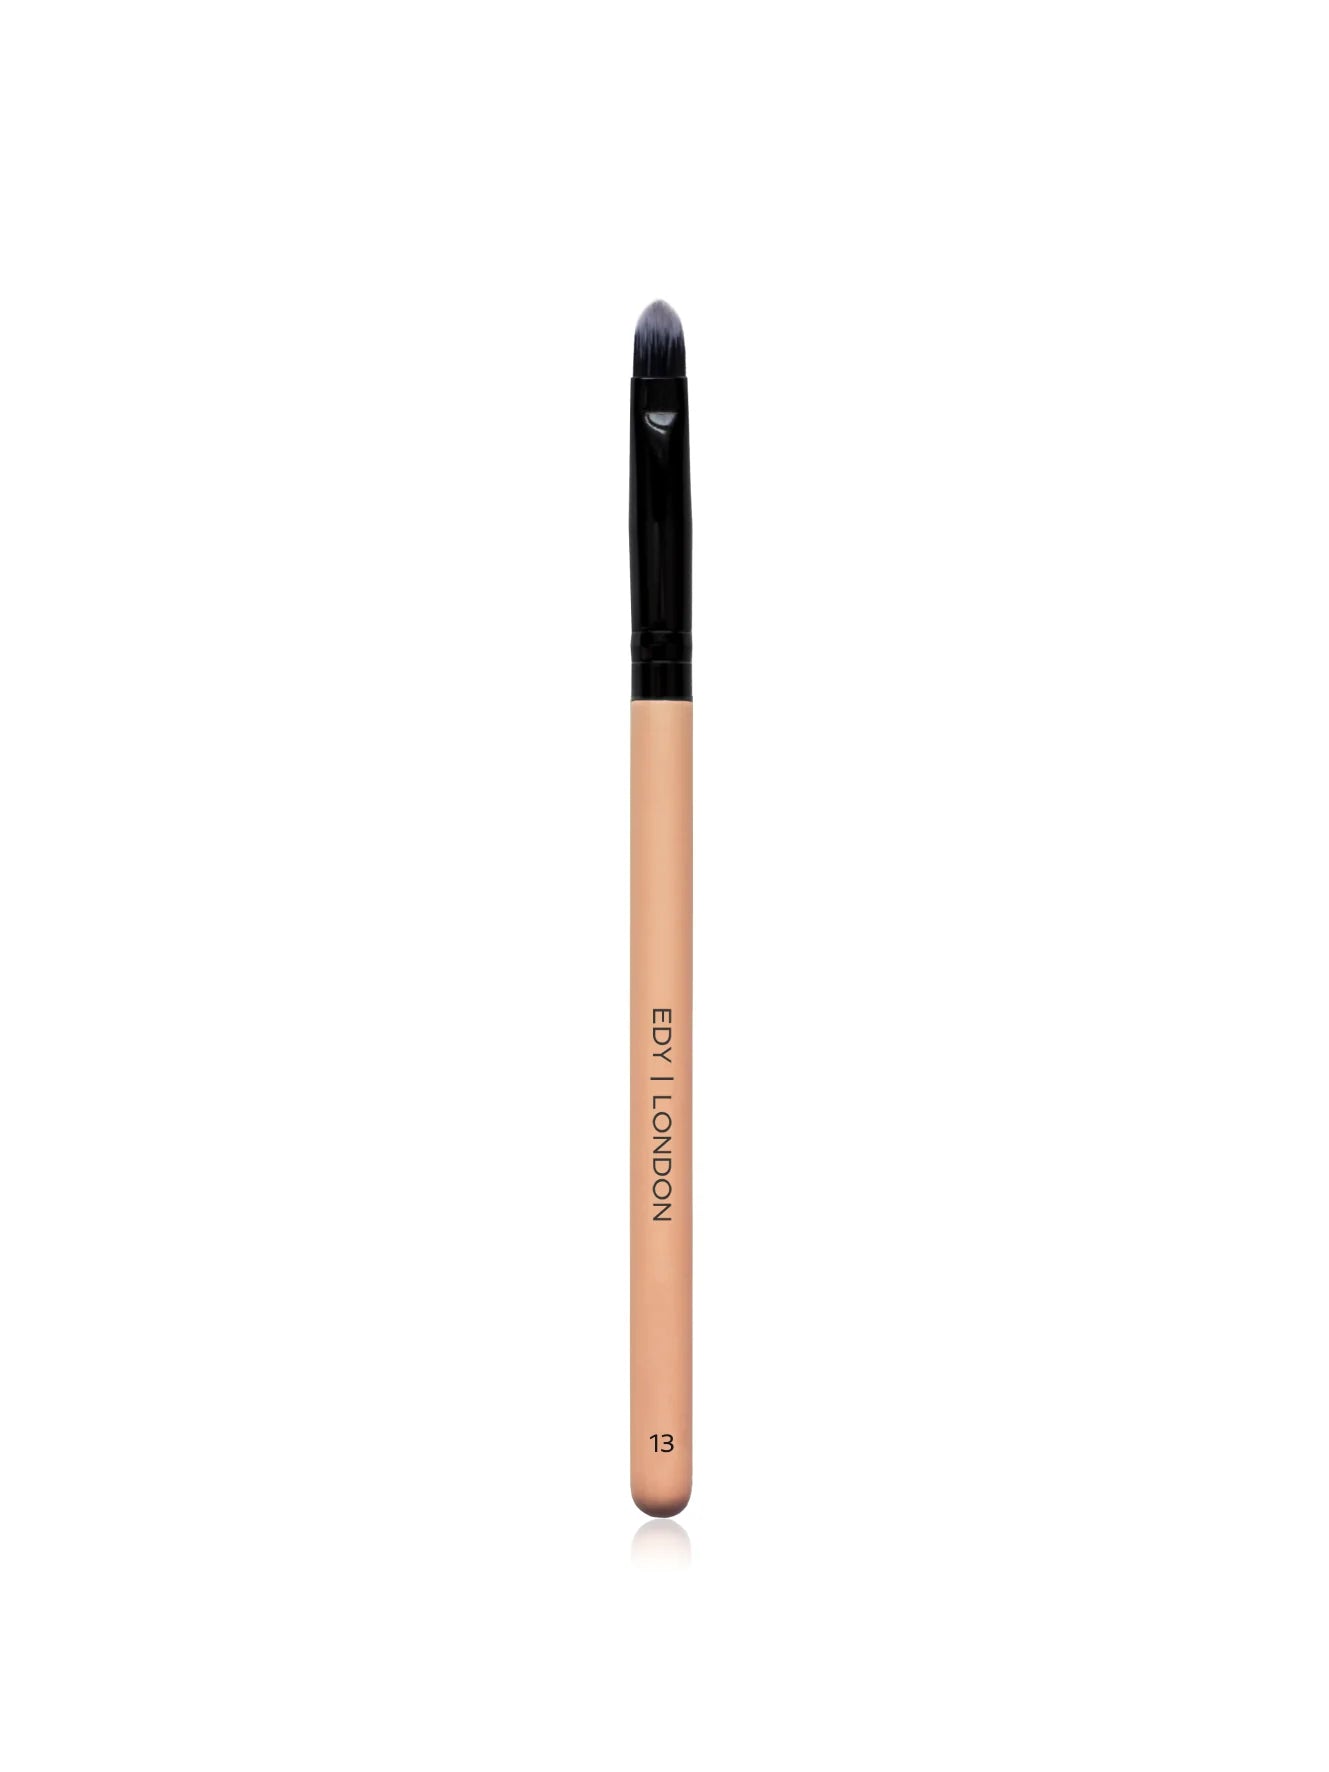 Precision Pencil / Shader Brush 13 Make-up Brush EDY LONDON Pale Pink   - EDY LONDON PRODUCTS UK - The Best Makeup Brushes - shop.edy.london